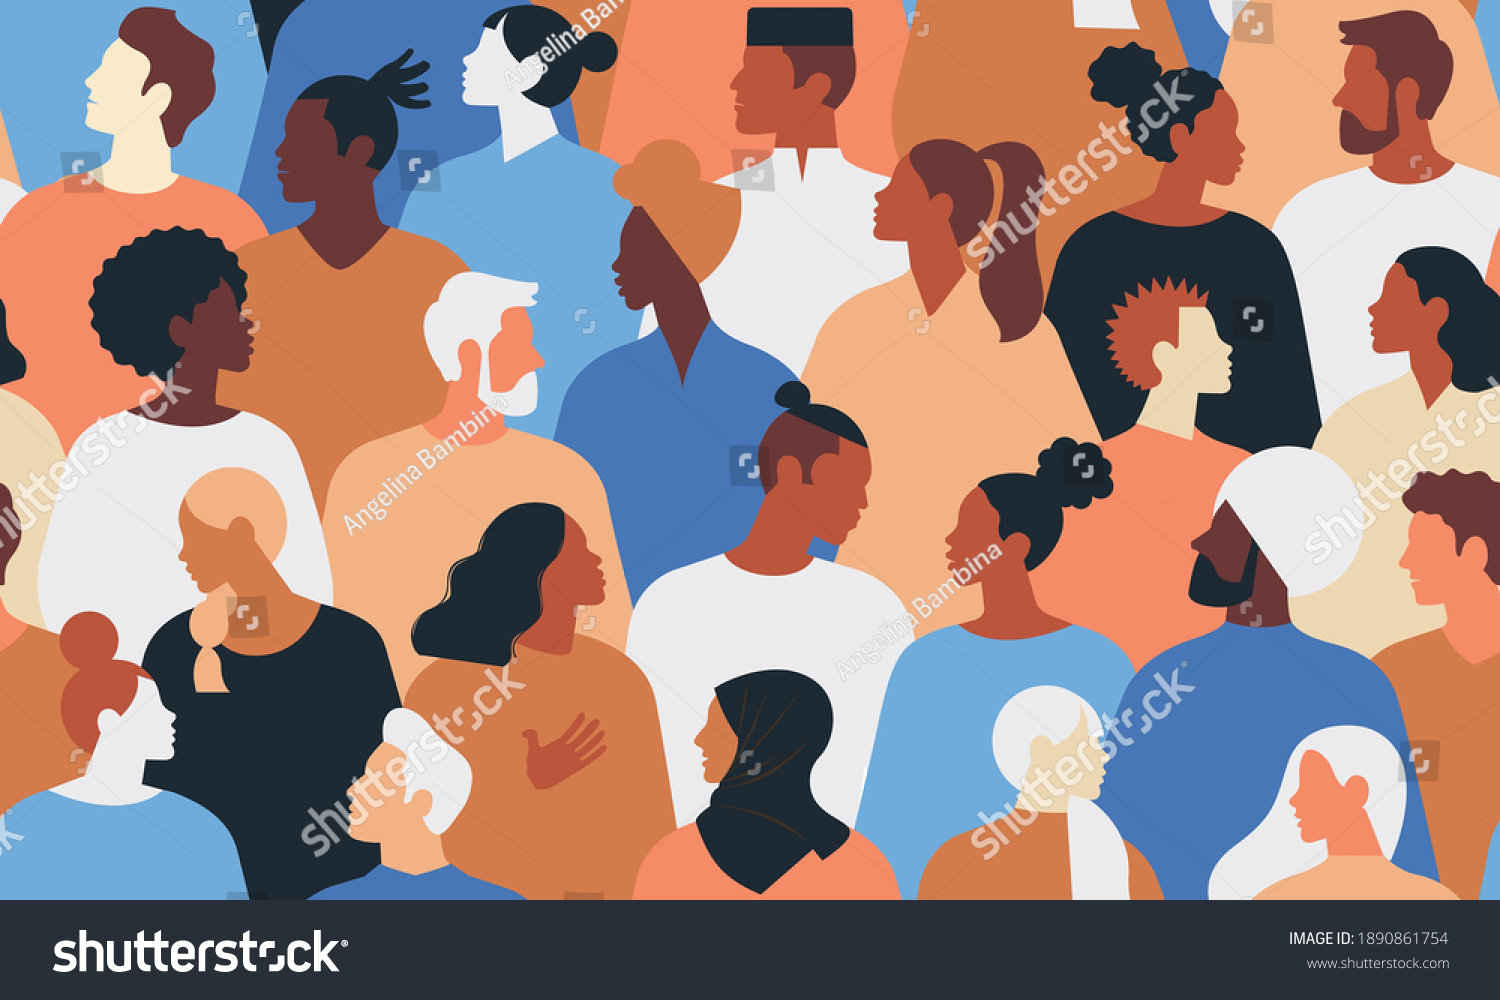 Crowd of young and elderly men and women in trendy hipster clothes. Diverse group of stylish people standing together. Society or population, social diversity. Flat cartoon vector illustration. #1890861754